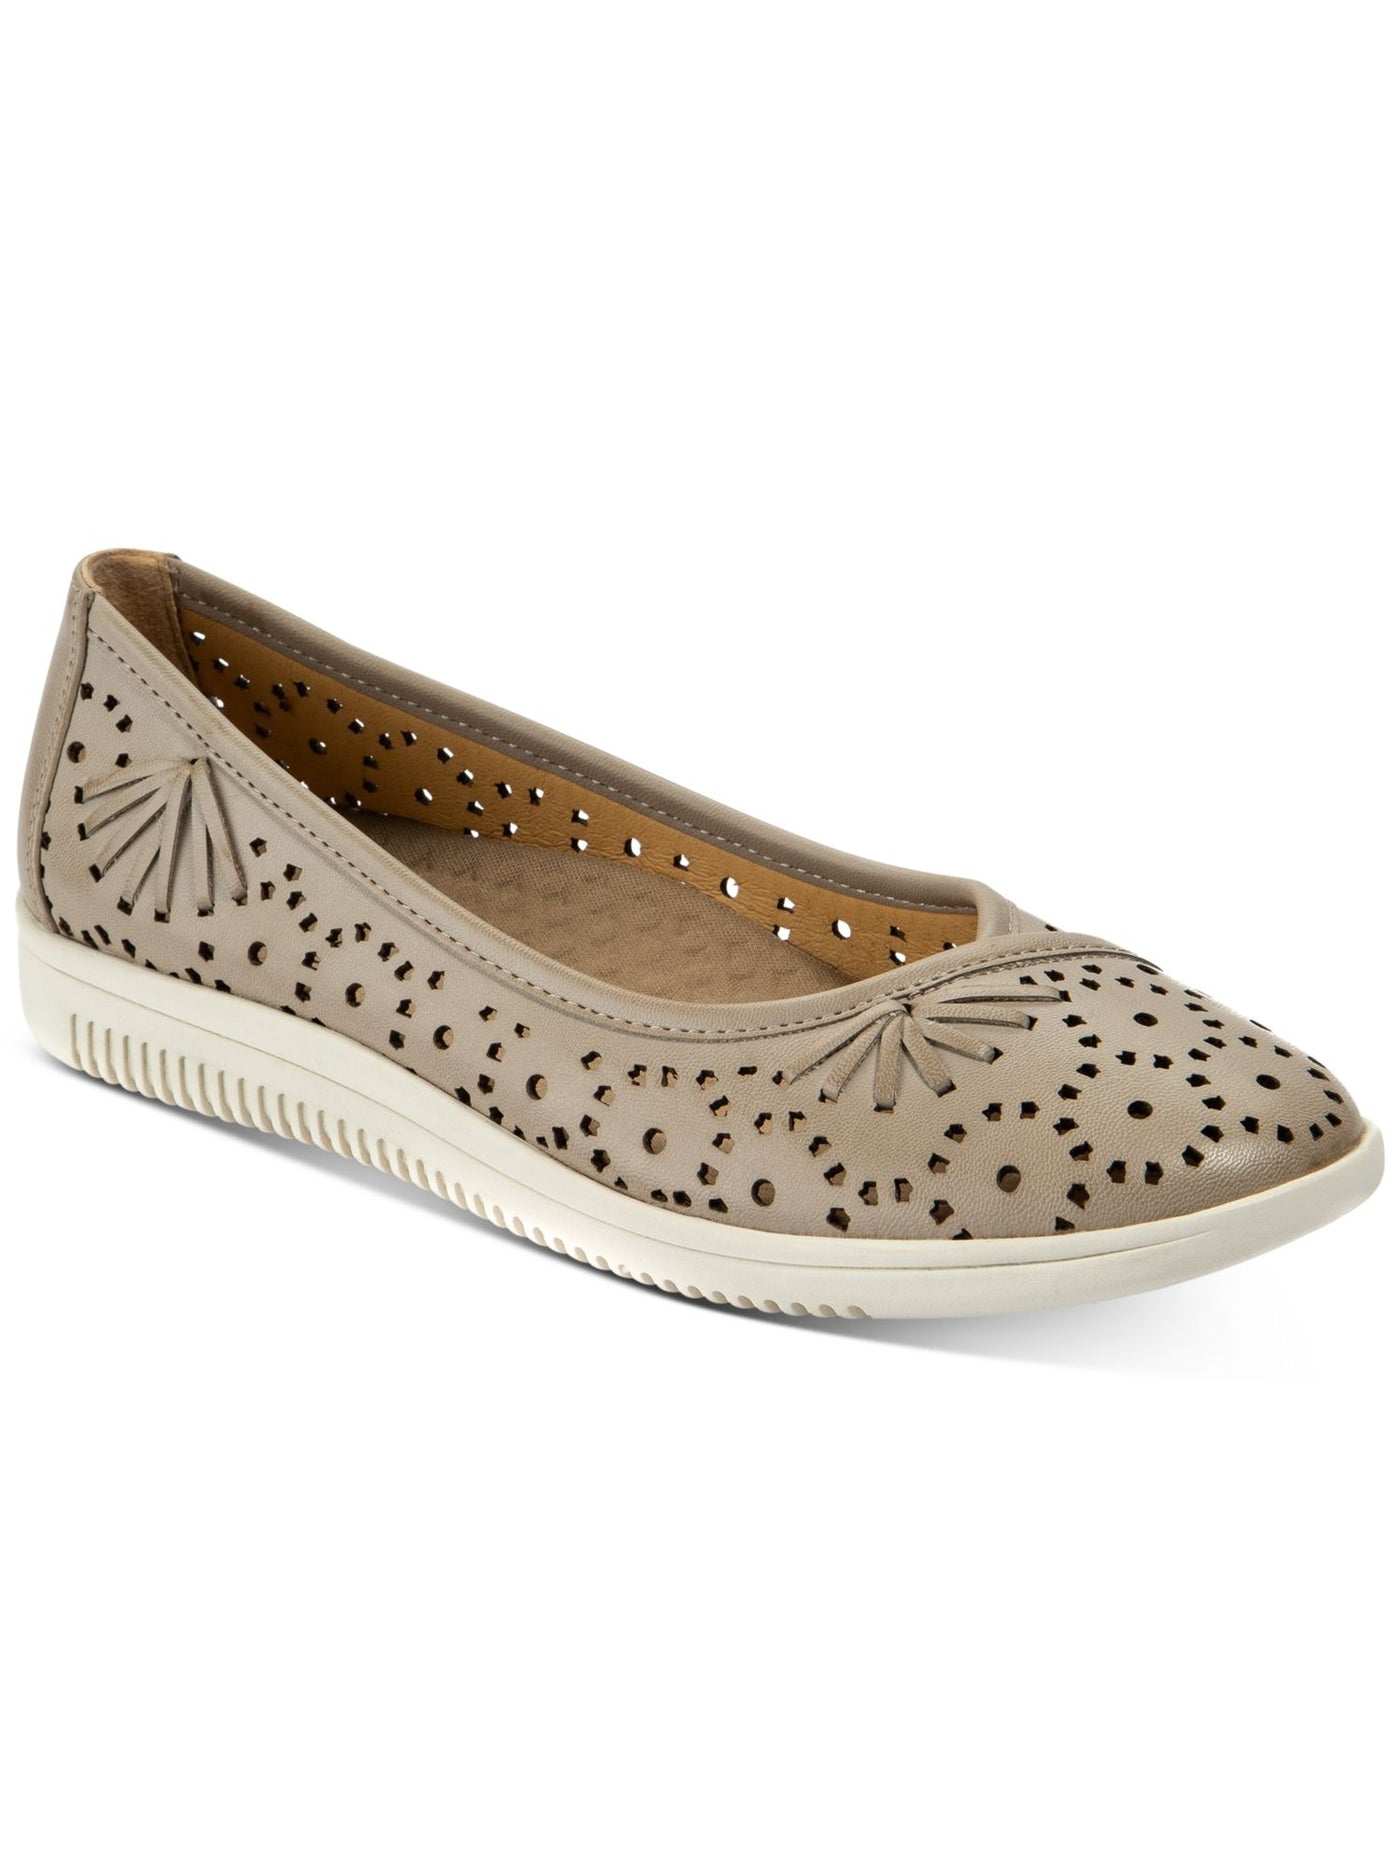 BARETRAPS Womens Beige 0.5" Platform Arch Support Antimicrobial Insole Stitch Detailing Perforated Cushioned Nissa Round Toe Wedge Slip On Flats Shoes 6.5 M